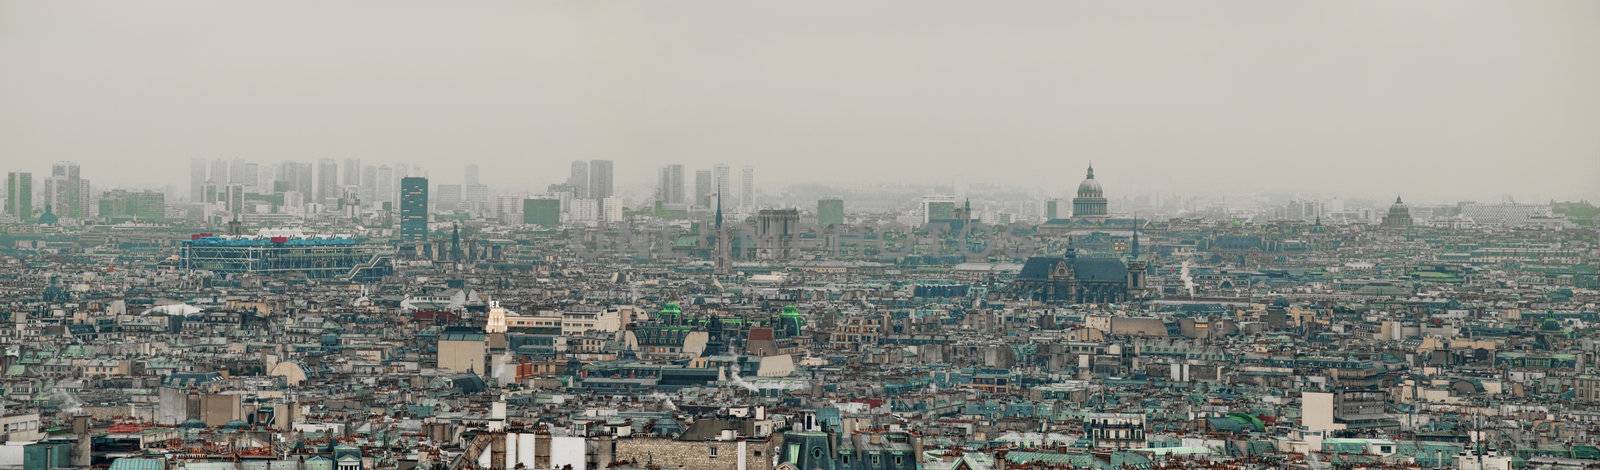 Paris panoramic view from the top of montmartre